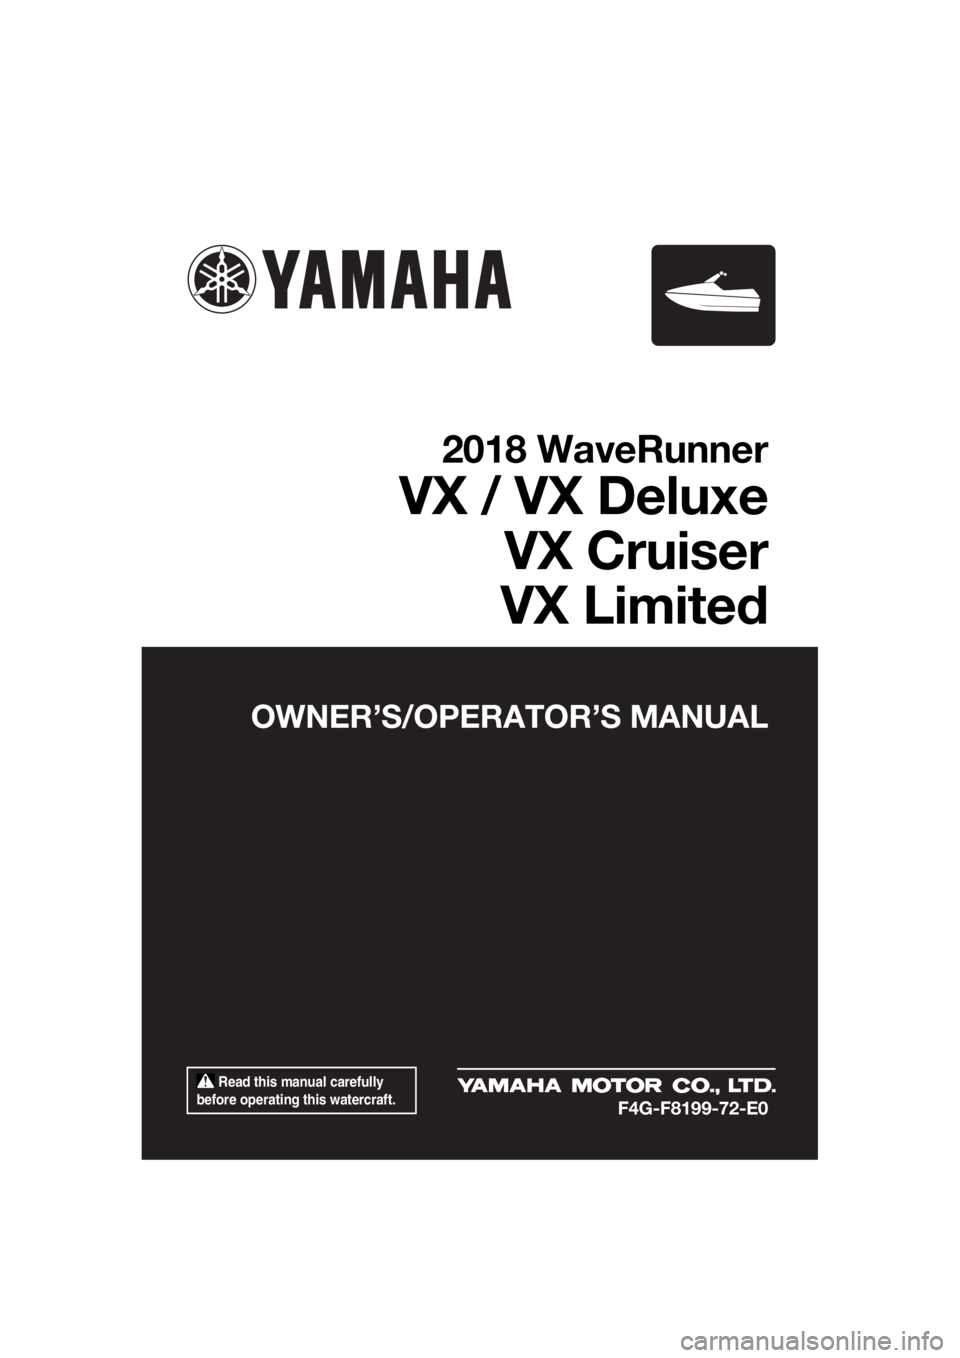 YAMAHA VX 2018  Owners Manual  Read this manual carefully 
before operating this watercraft.
OWNER’S/OPERATOR’S MANUAL
2018 WaveRunner
VX / VX Deluxe
VX Cruiser
VX Limited
F4G-F8199-72-E0
UF4G72E0.book  Page 1  Tuesday, August